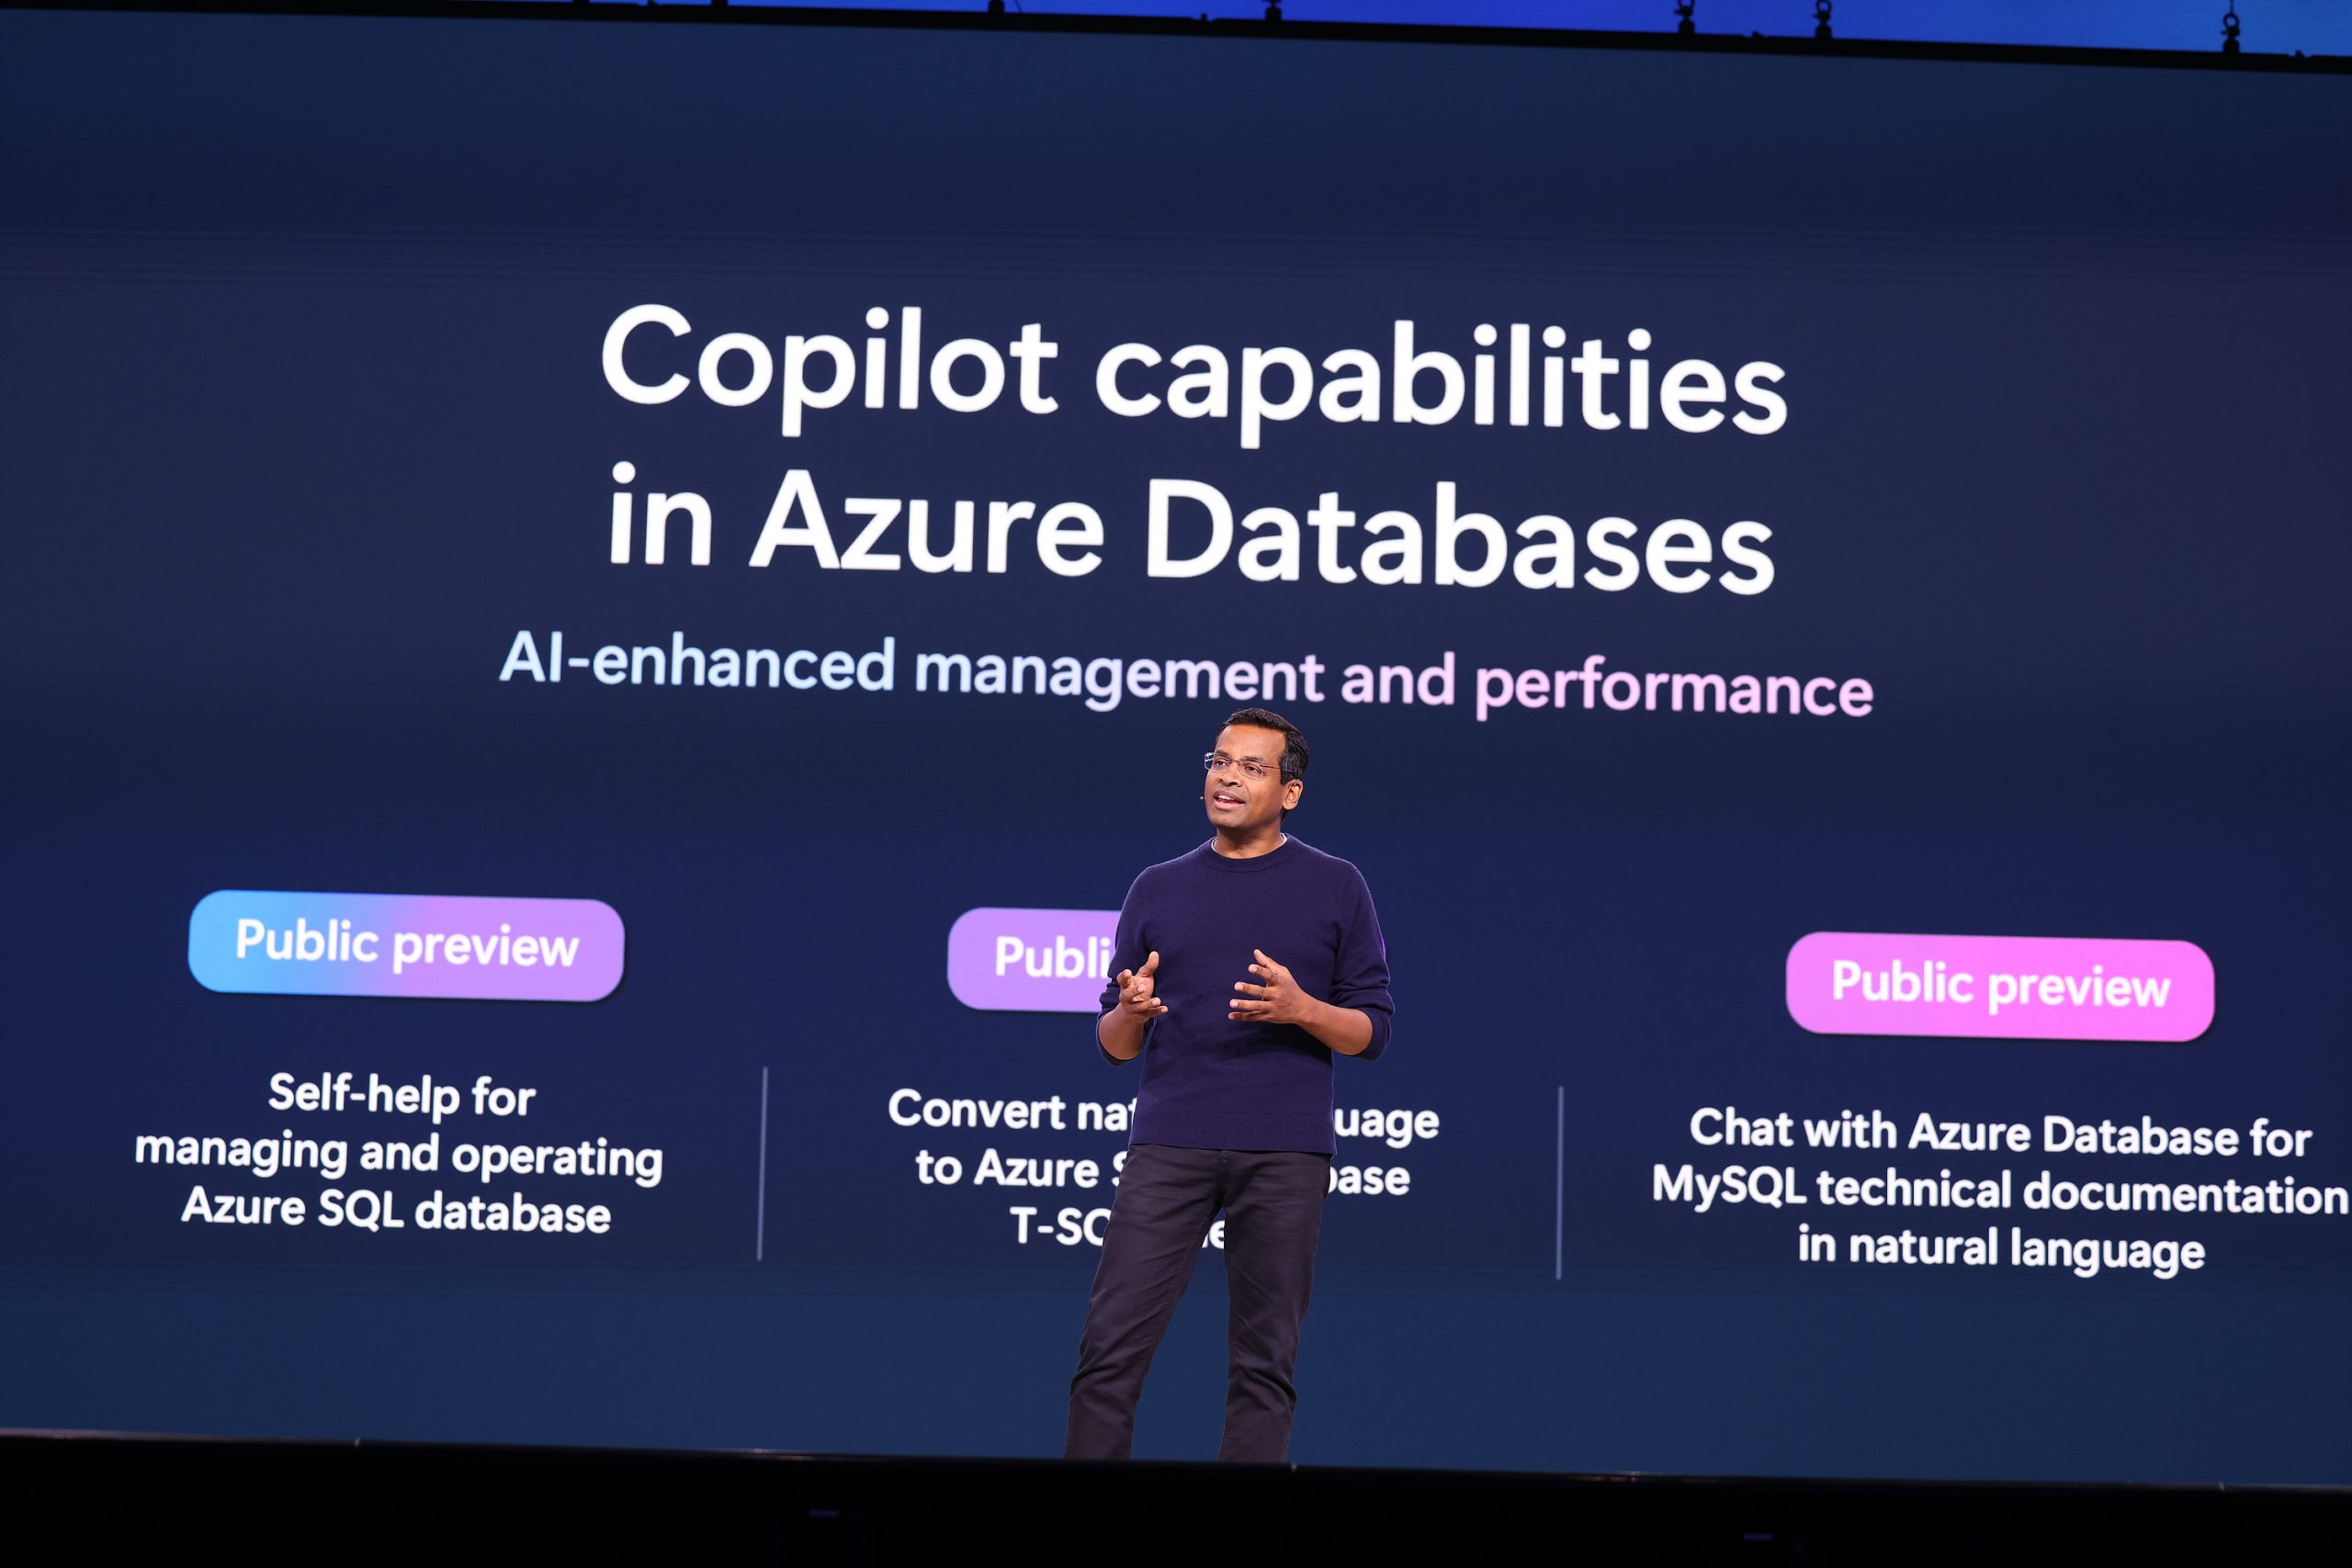 A man standing on stage speaking to an audience and gesturing with his hands, with text on the screen behind him about Copilot capabilities in Azure Databases